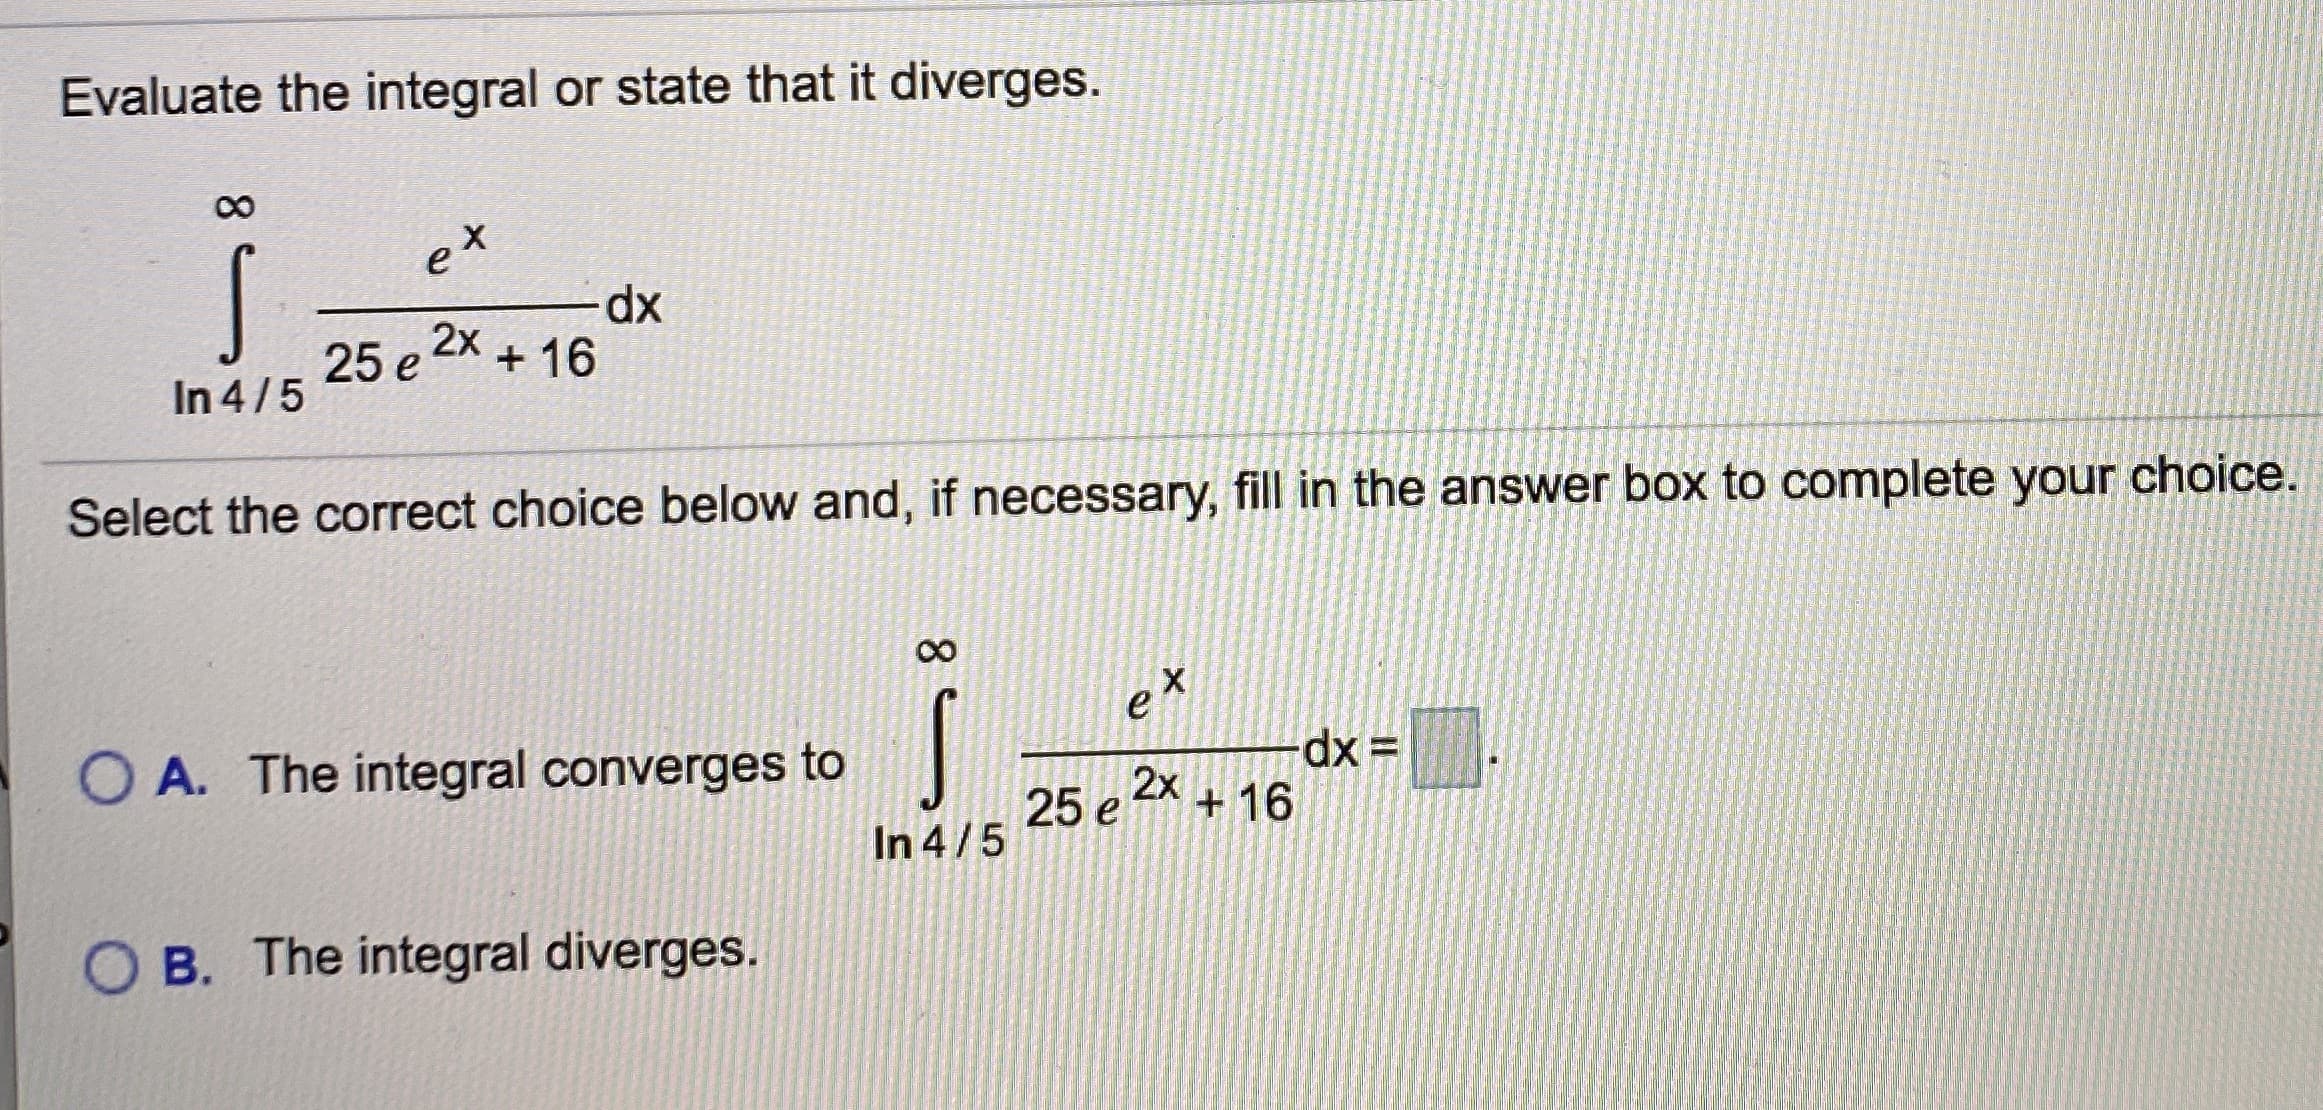 Evaluate the integral or state that it diverges.
et
2x
25 e
+ 16
In 4/5
